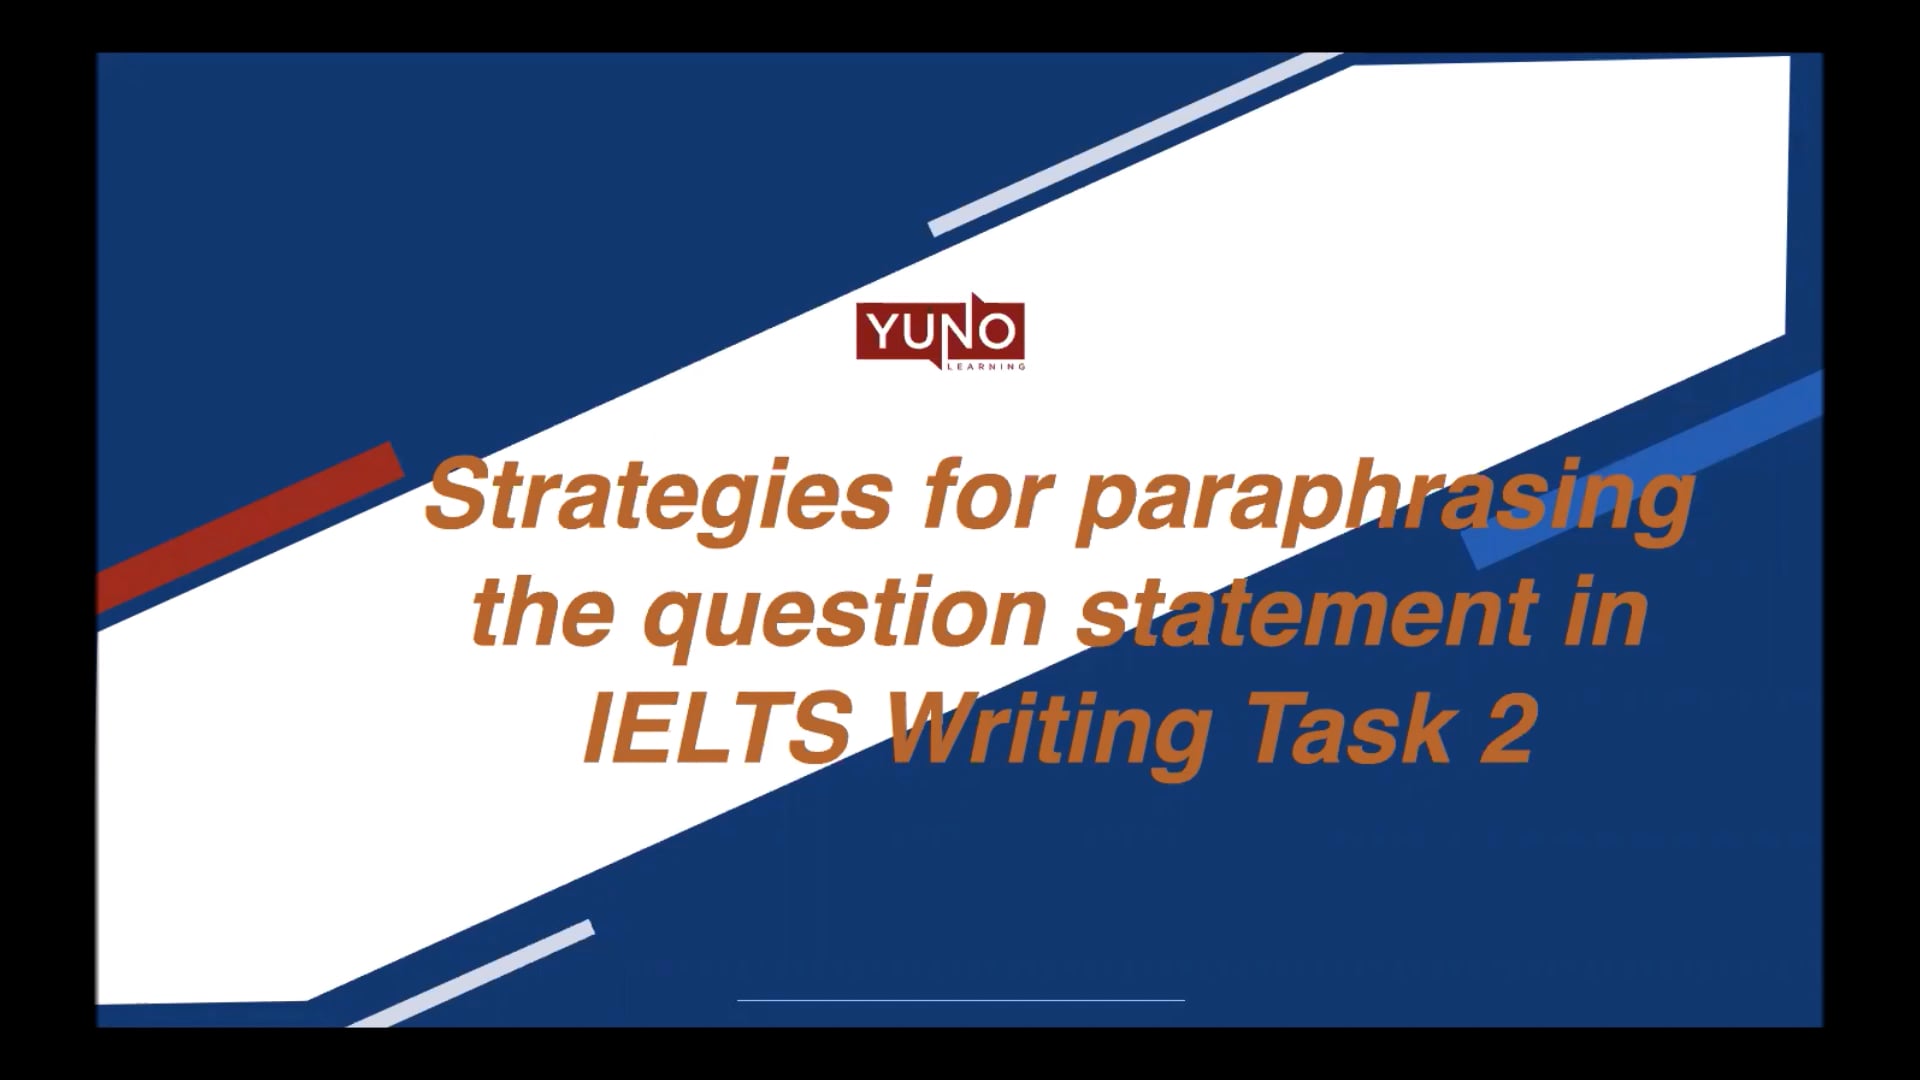 IELTS Writing Task 2: How to Paraphrase Question